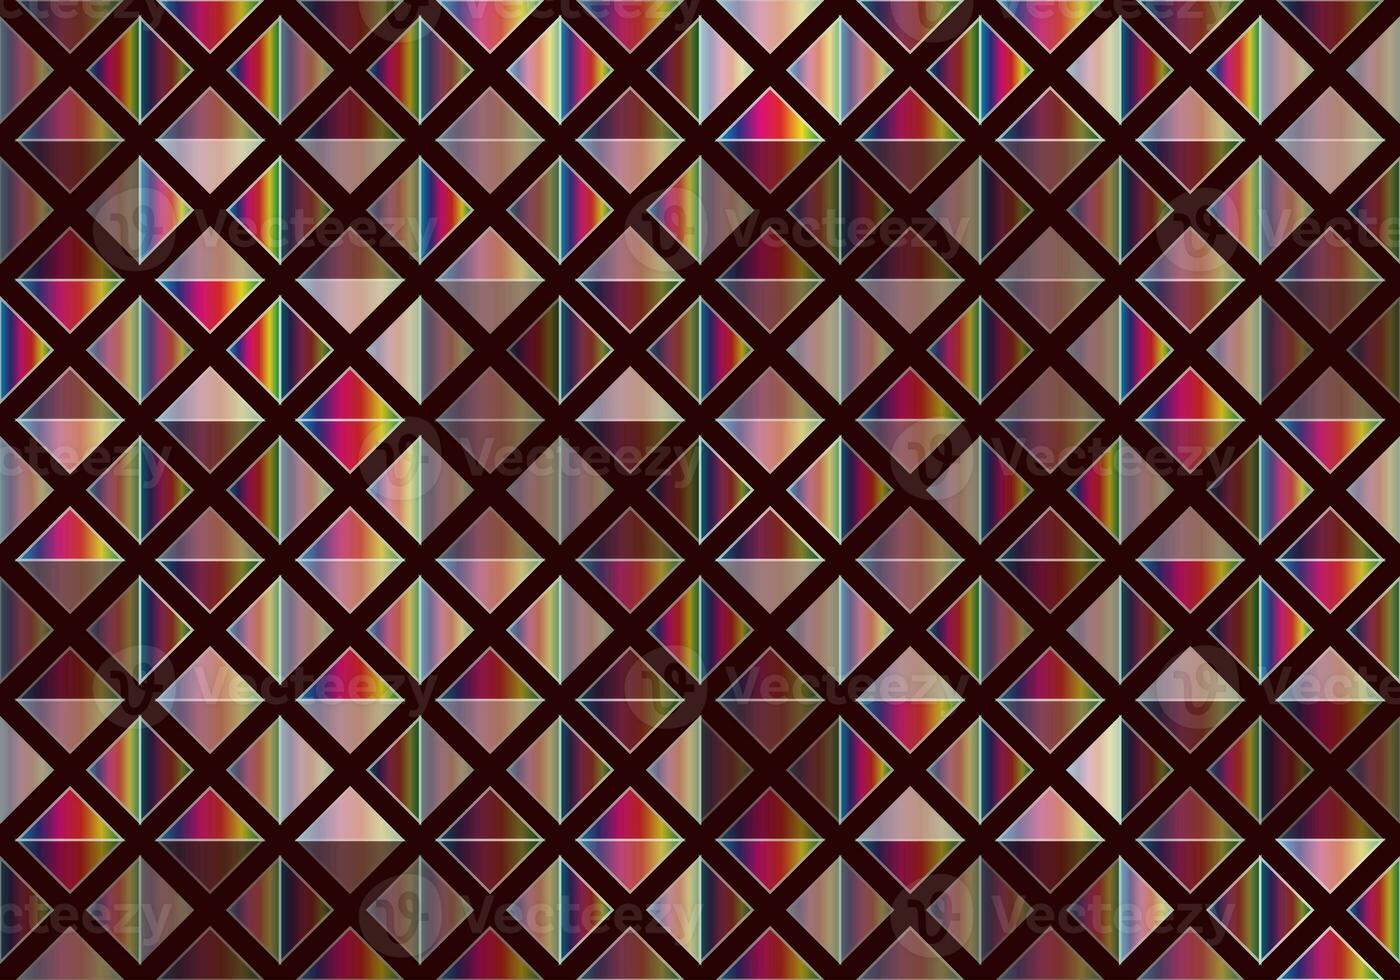 Gradient-based square pattern in brown and Rainbow color Square Gradient on Dark brown background is best for Print Design, Textile, Packaging Design, Web, Interior Design photo